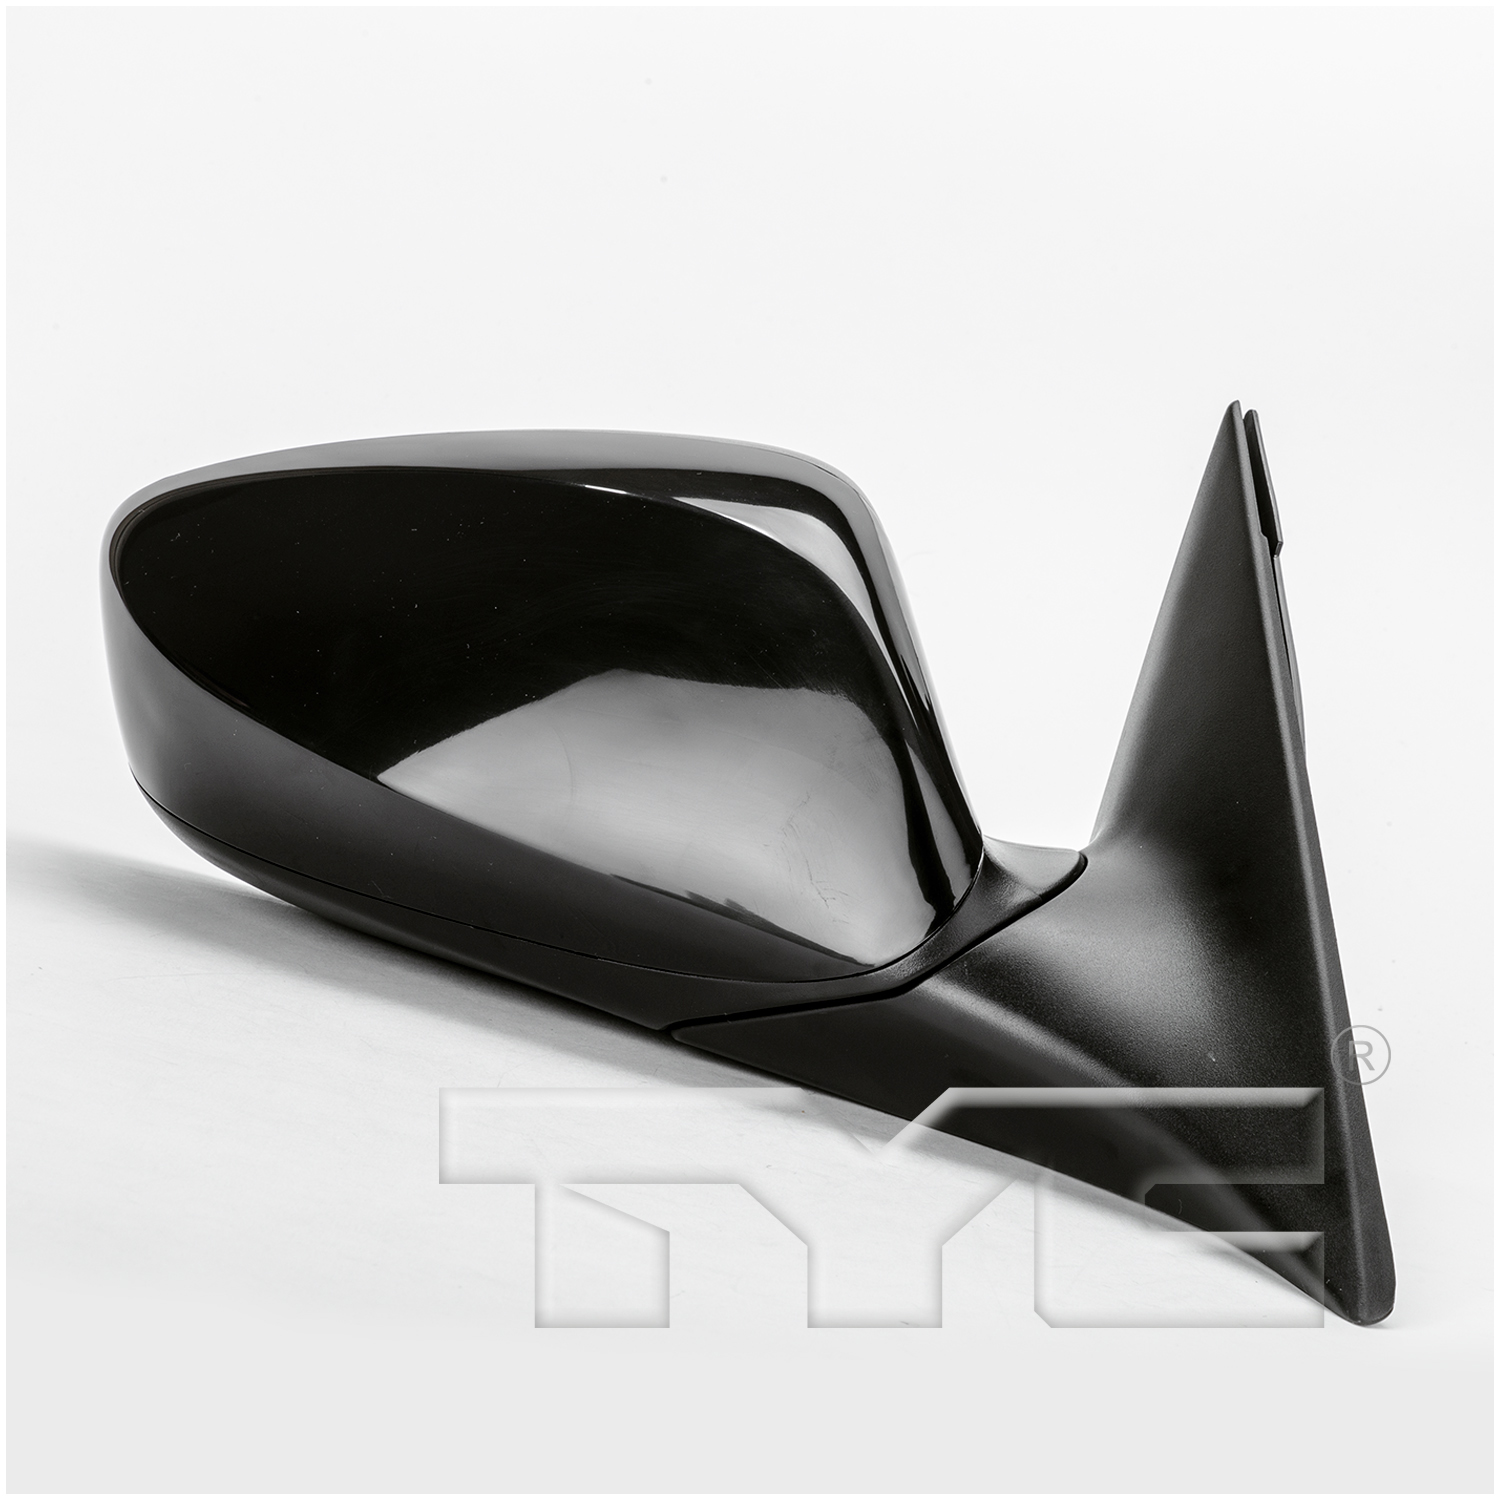 Aftermarket MIRRORS for HYUNDAI - VELOSTER, VELOSTER,12-13,RT Mirror outside rear view